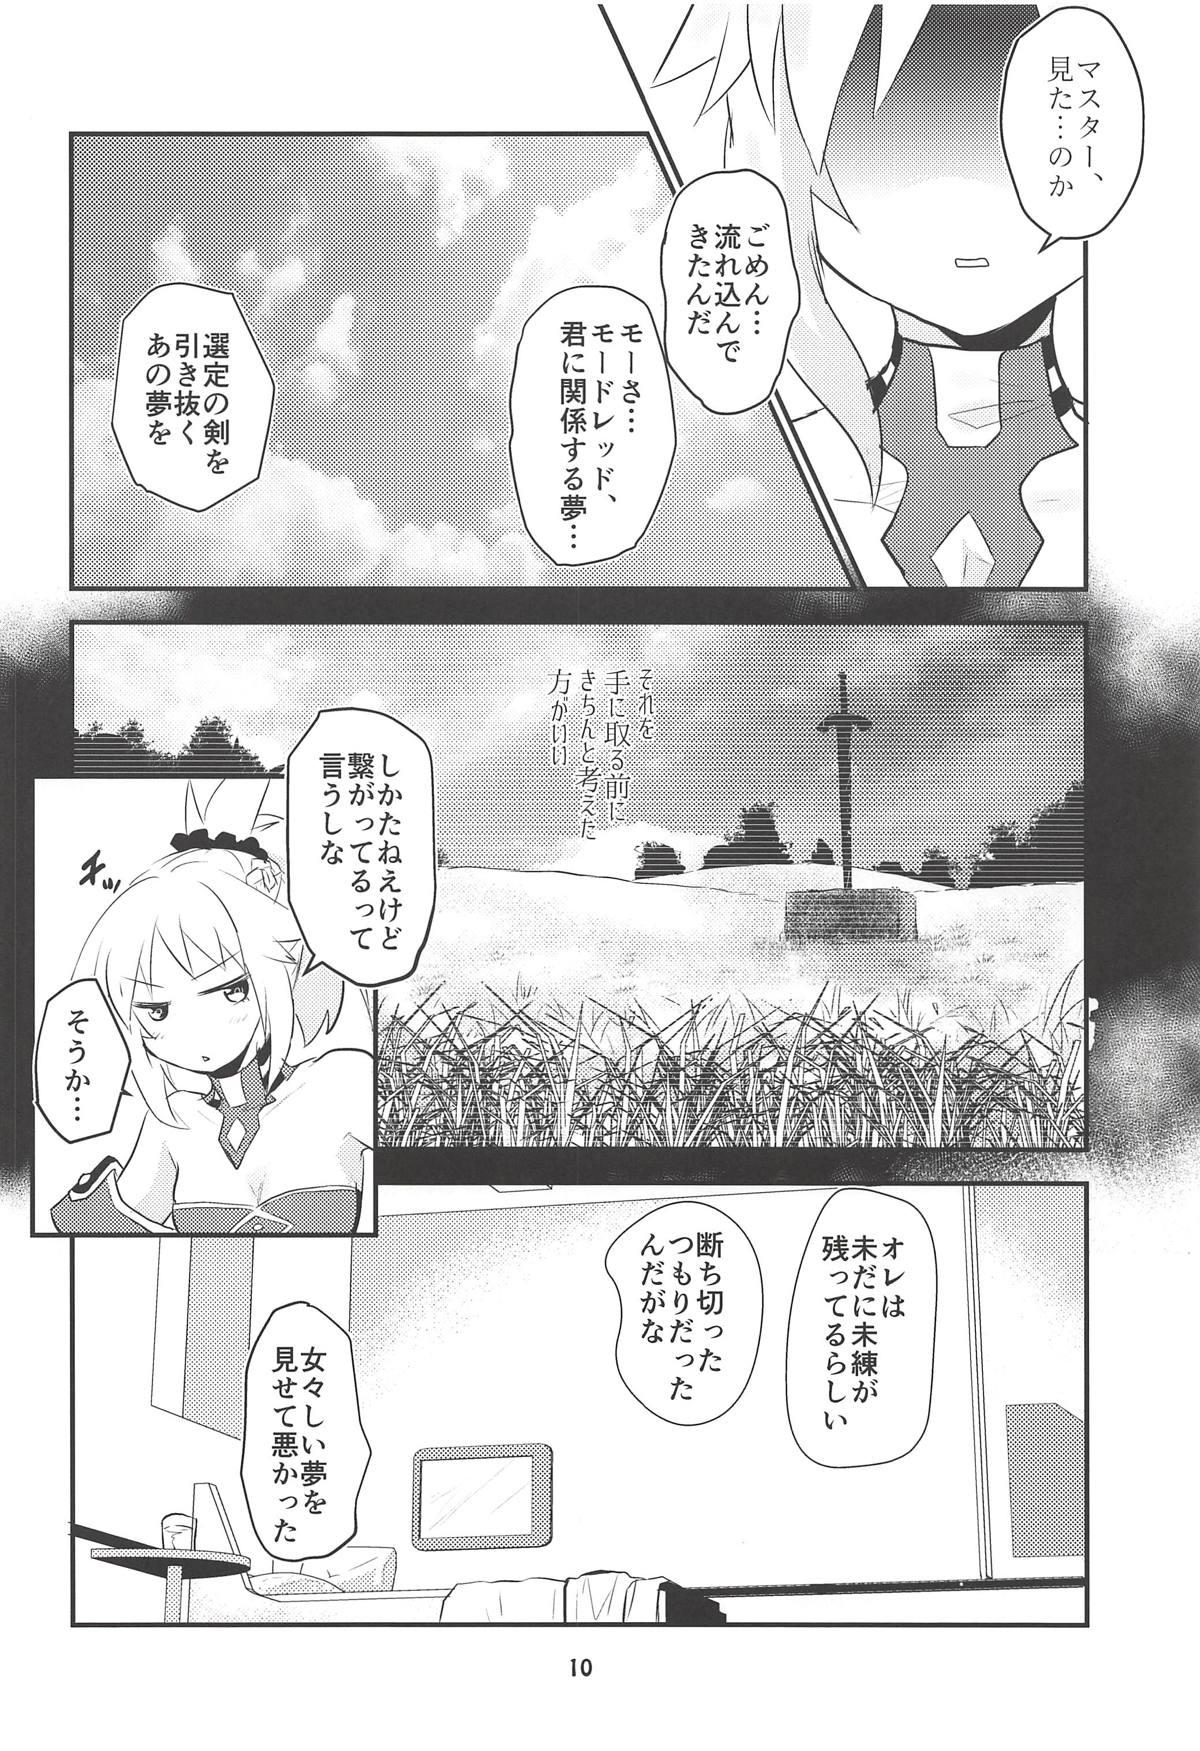 Bear Dreaming - Fate grand order Family - Page 9